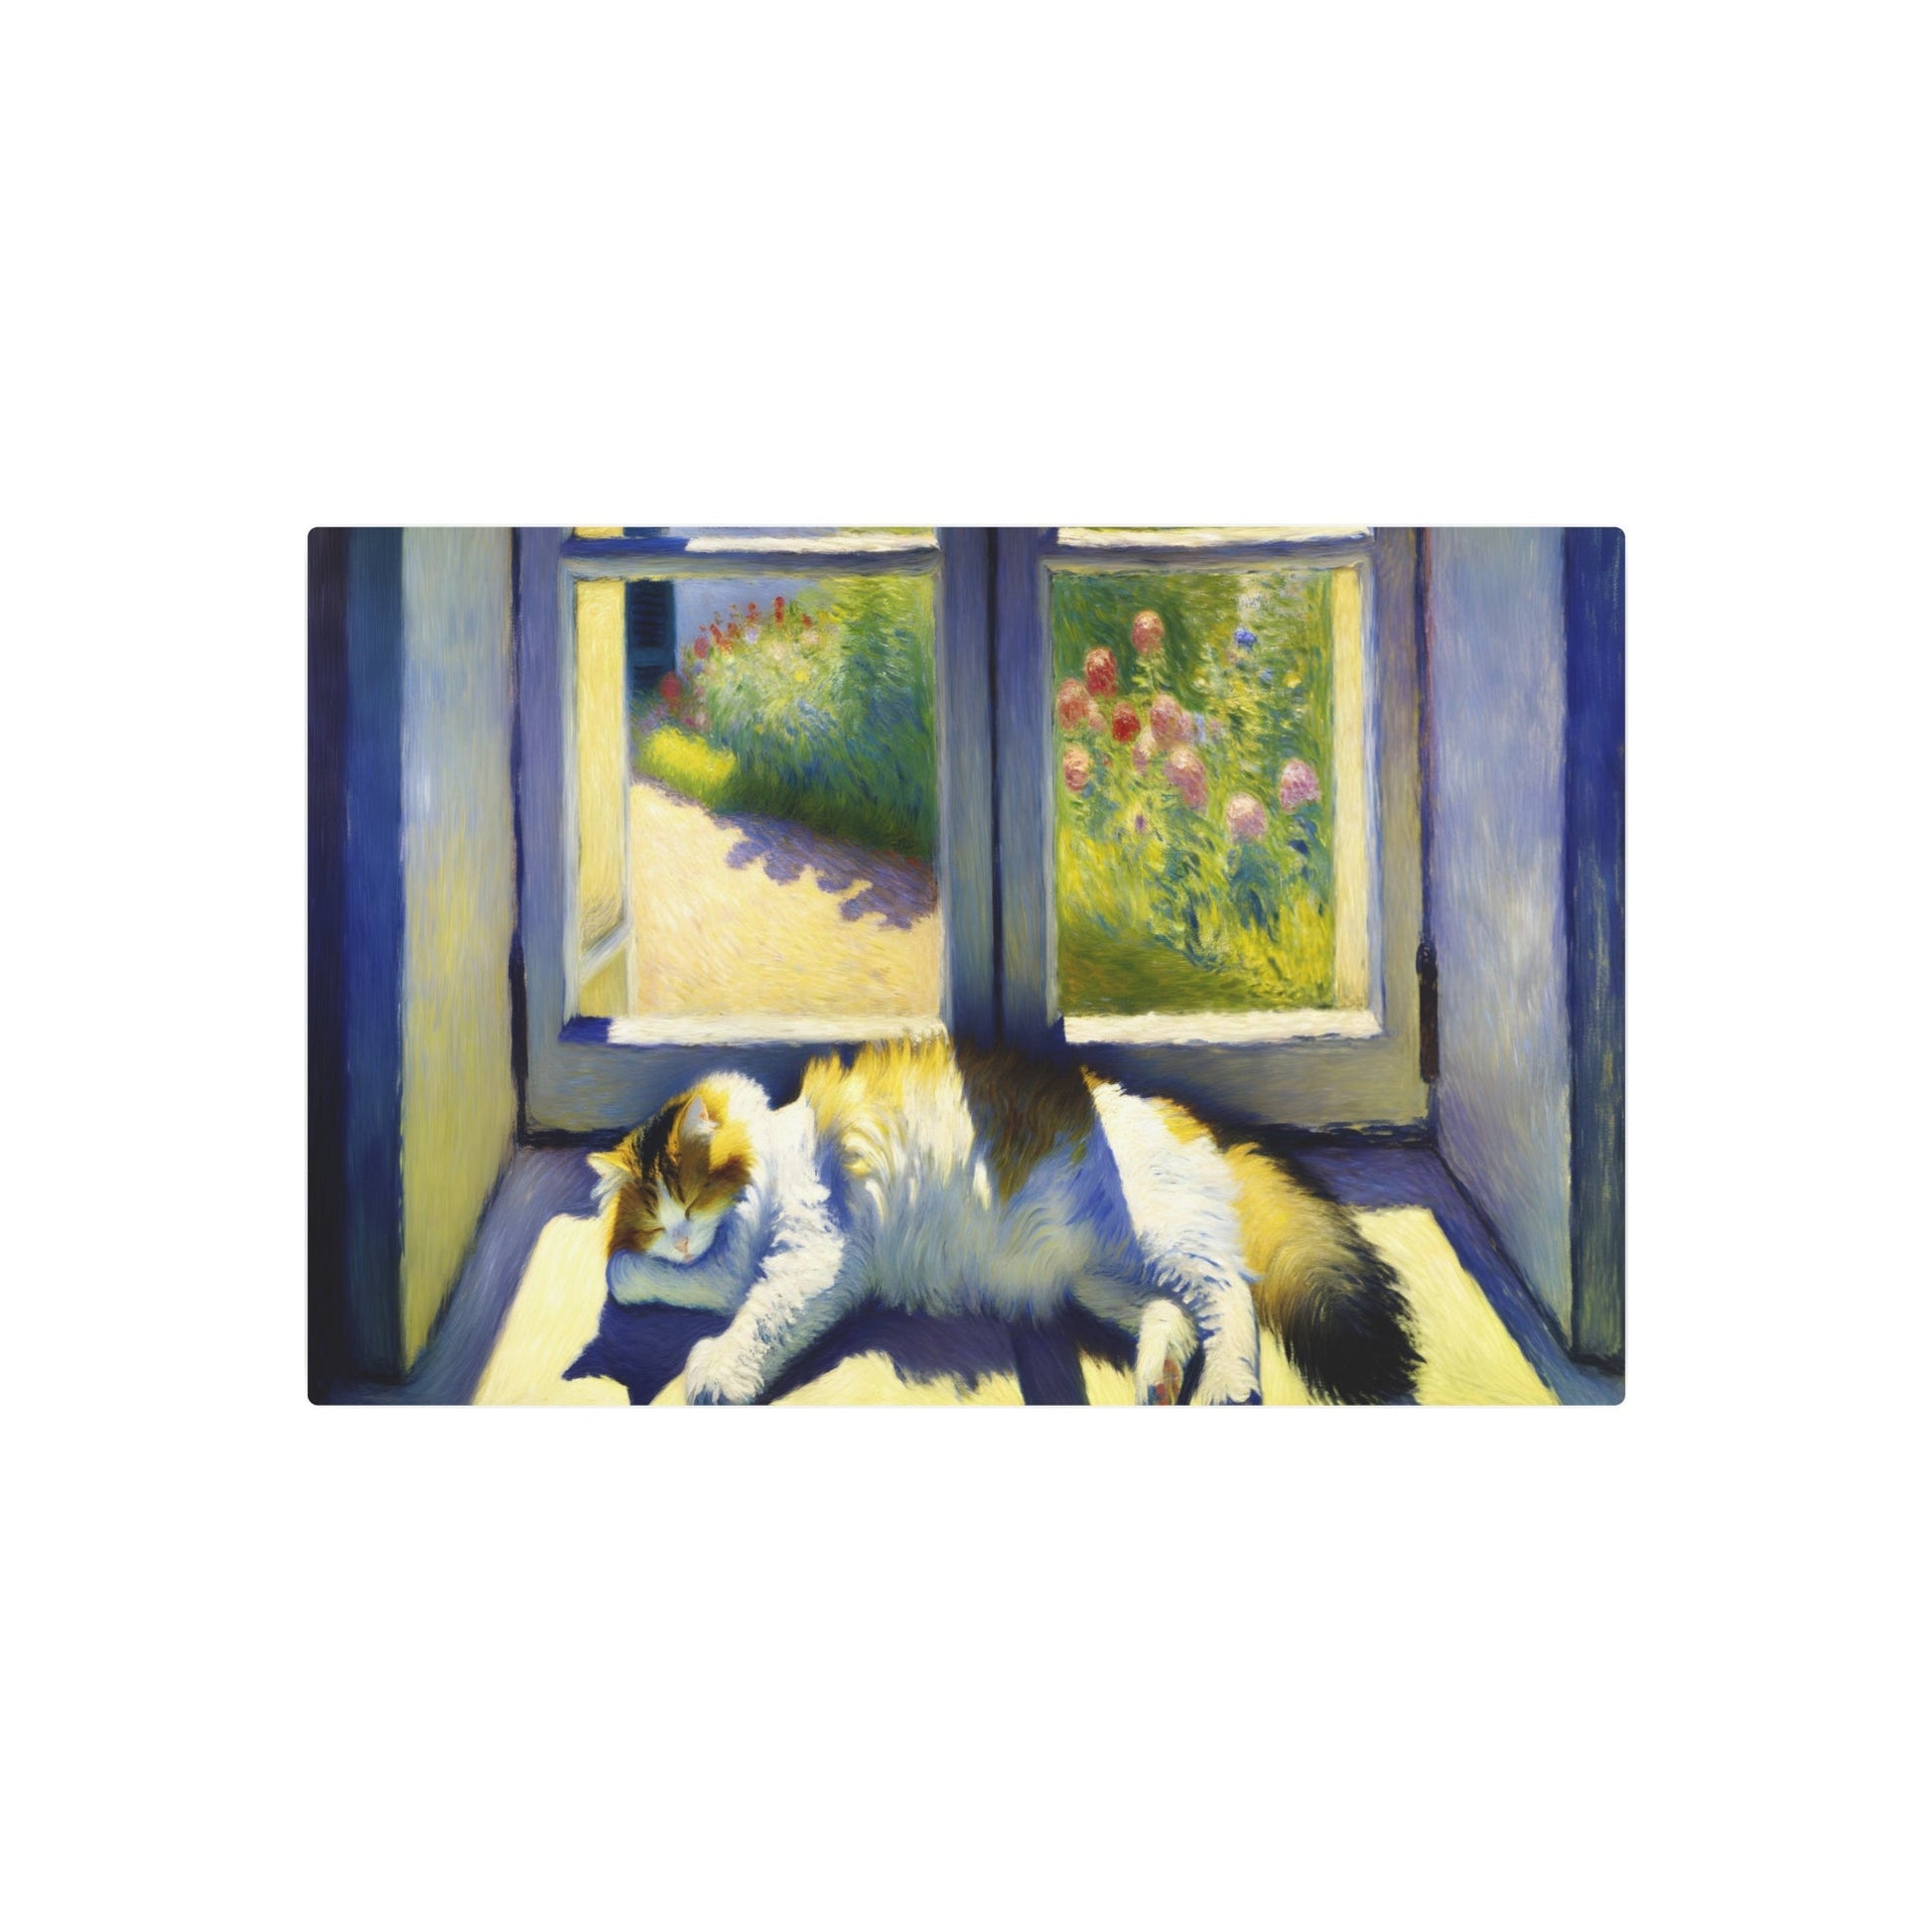 Metal Poster Art | "Impressionist Western Art: Sun-Drenched Cat Lounging on Windowsill Painting" - Metal Poster Art 30″ x 20″ (Horizontal) 0.12''